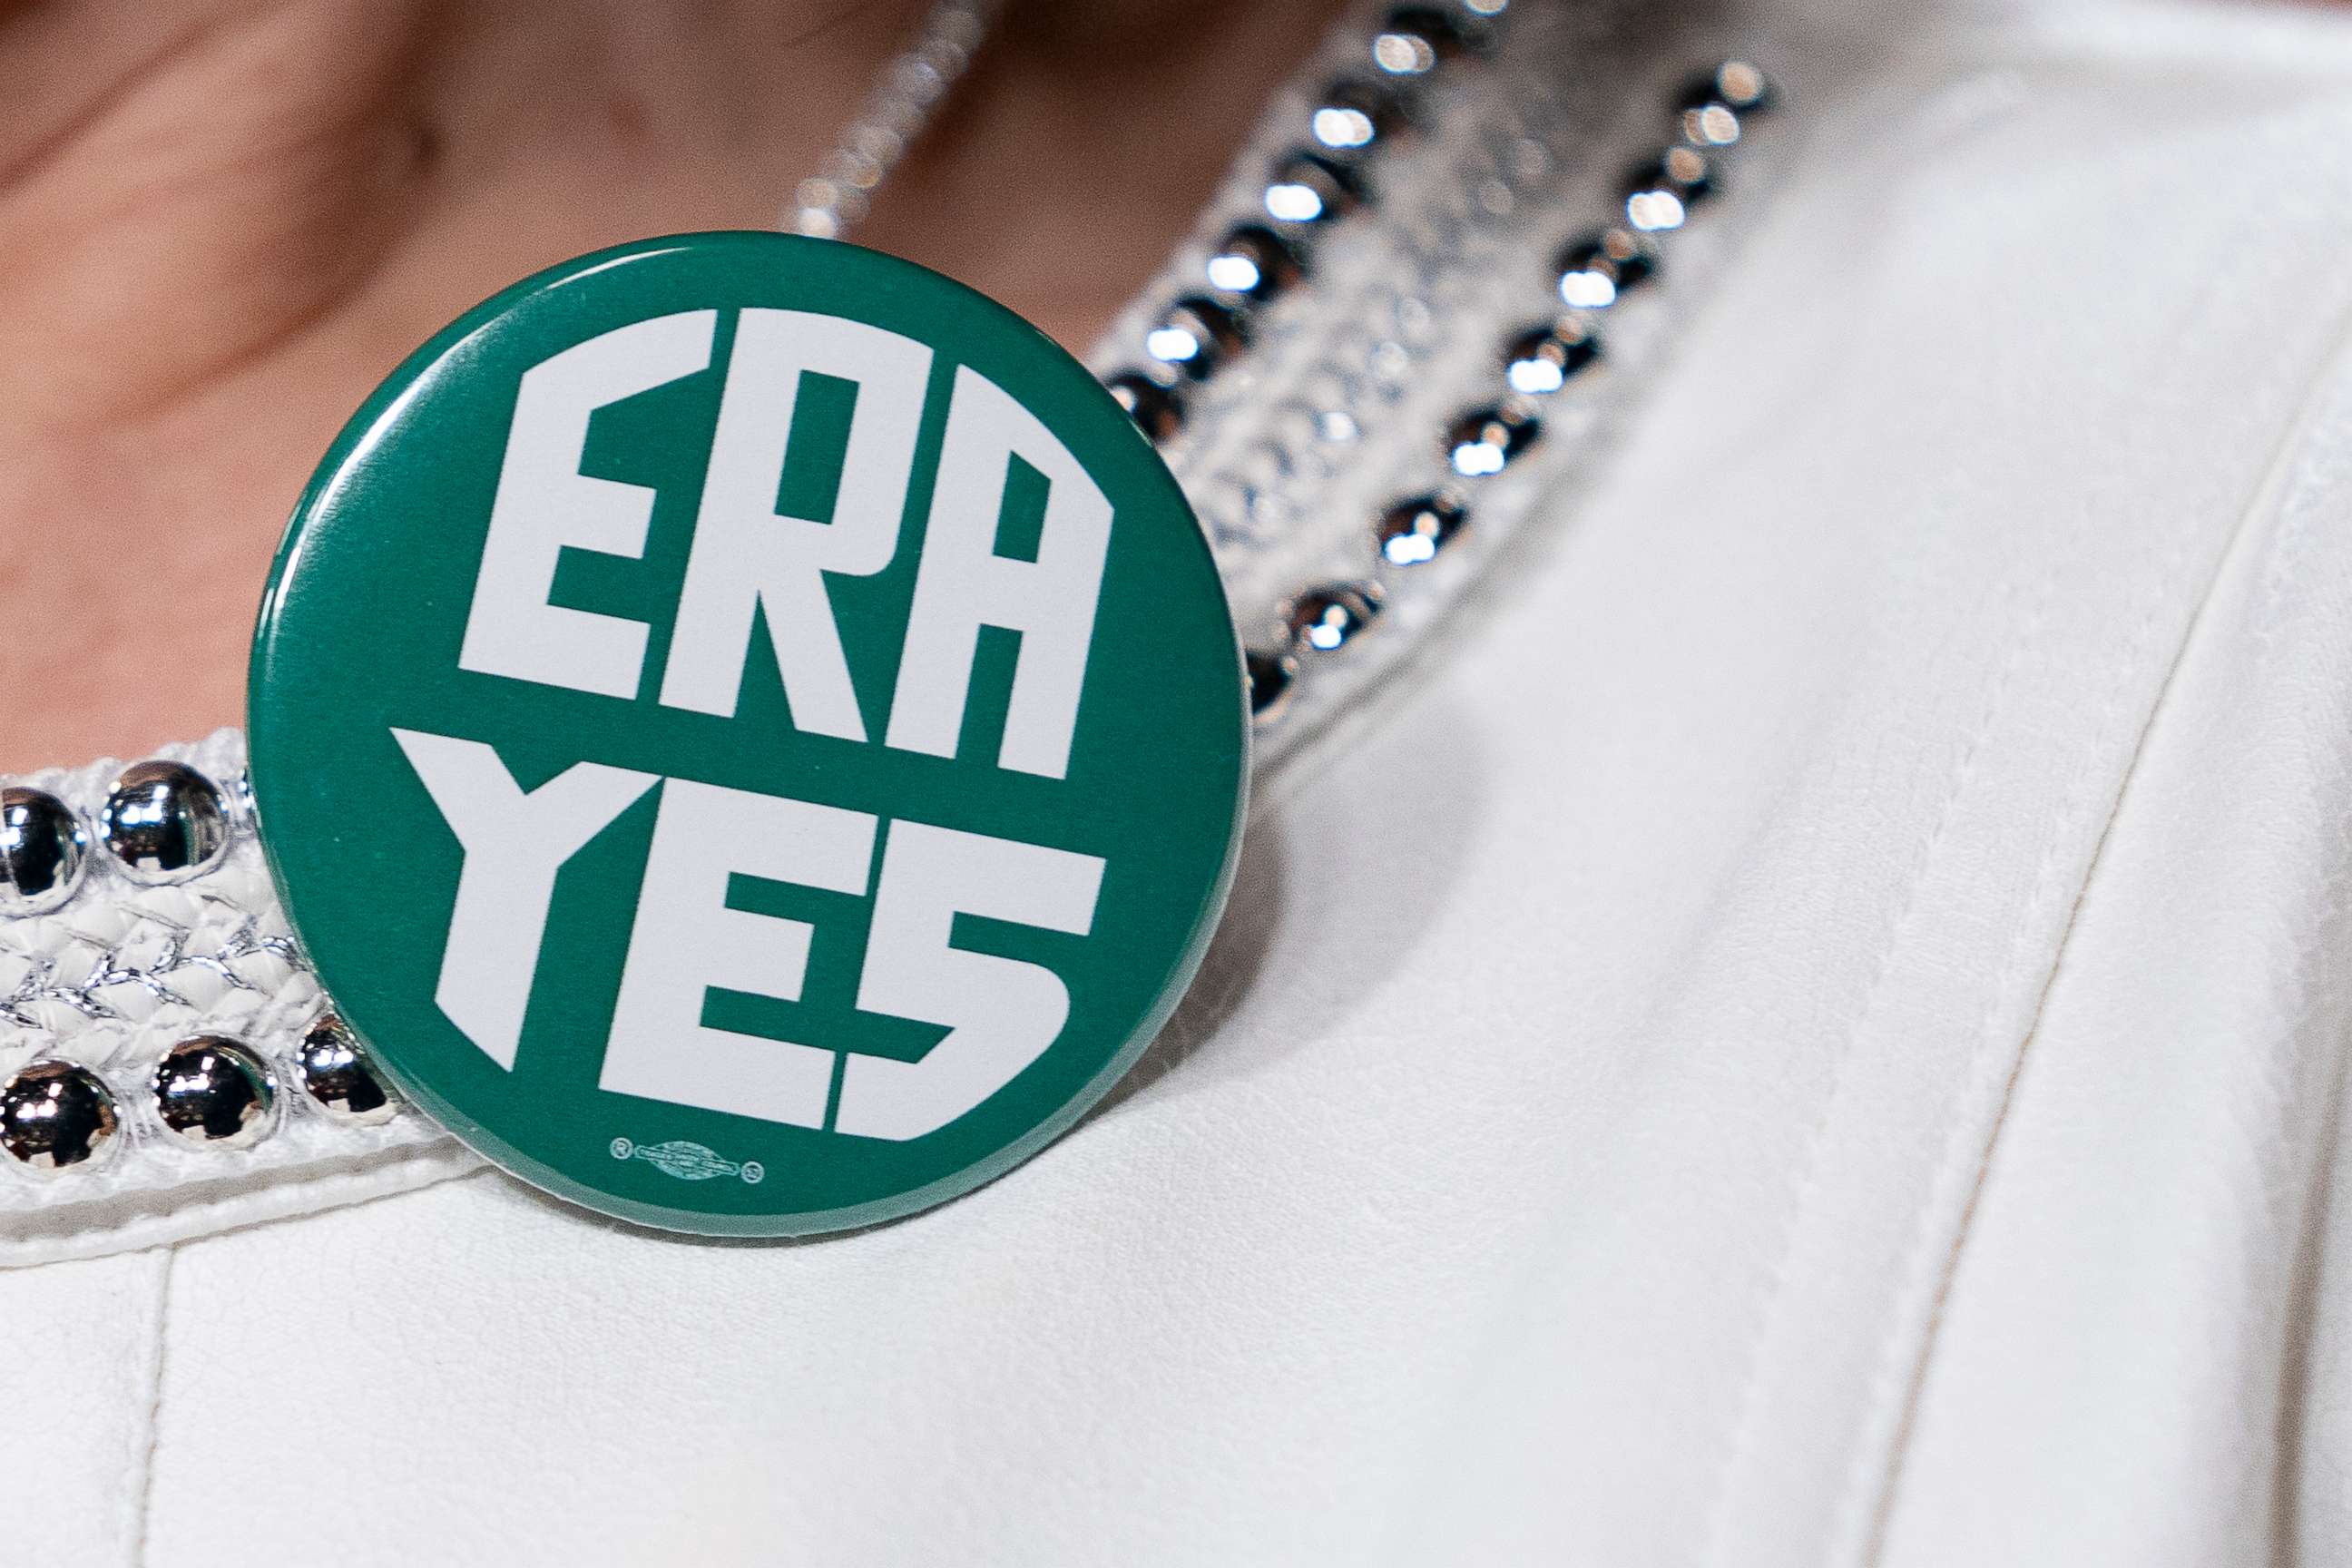 PHOTO: Rep. Jackie Speier (D-CA) wears a button supporting passage of the Equal Rights Amendment as she waits to speak during a news conference prior to State of the Union at the Capitol on Feb. 4, 2020 in Washington, DC.